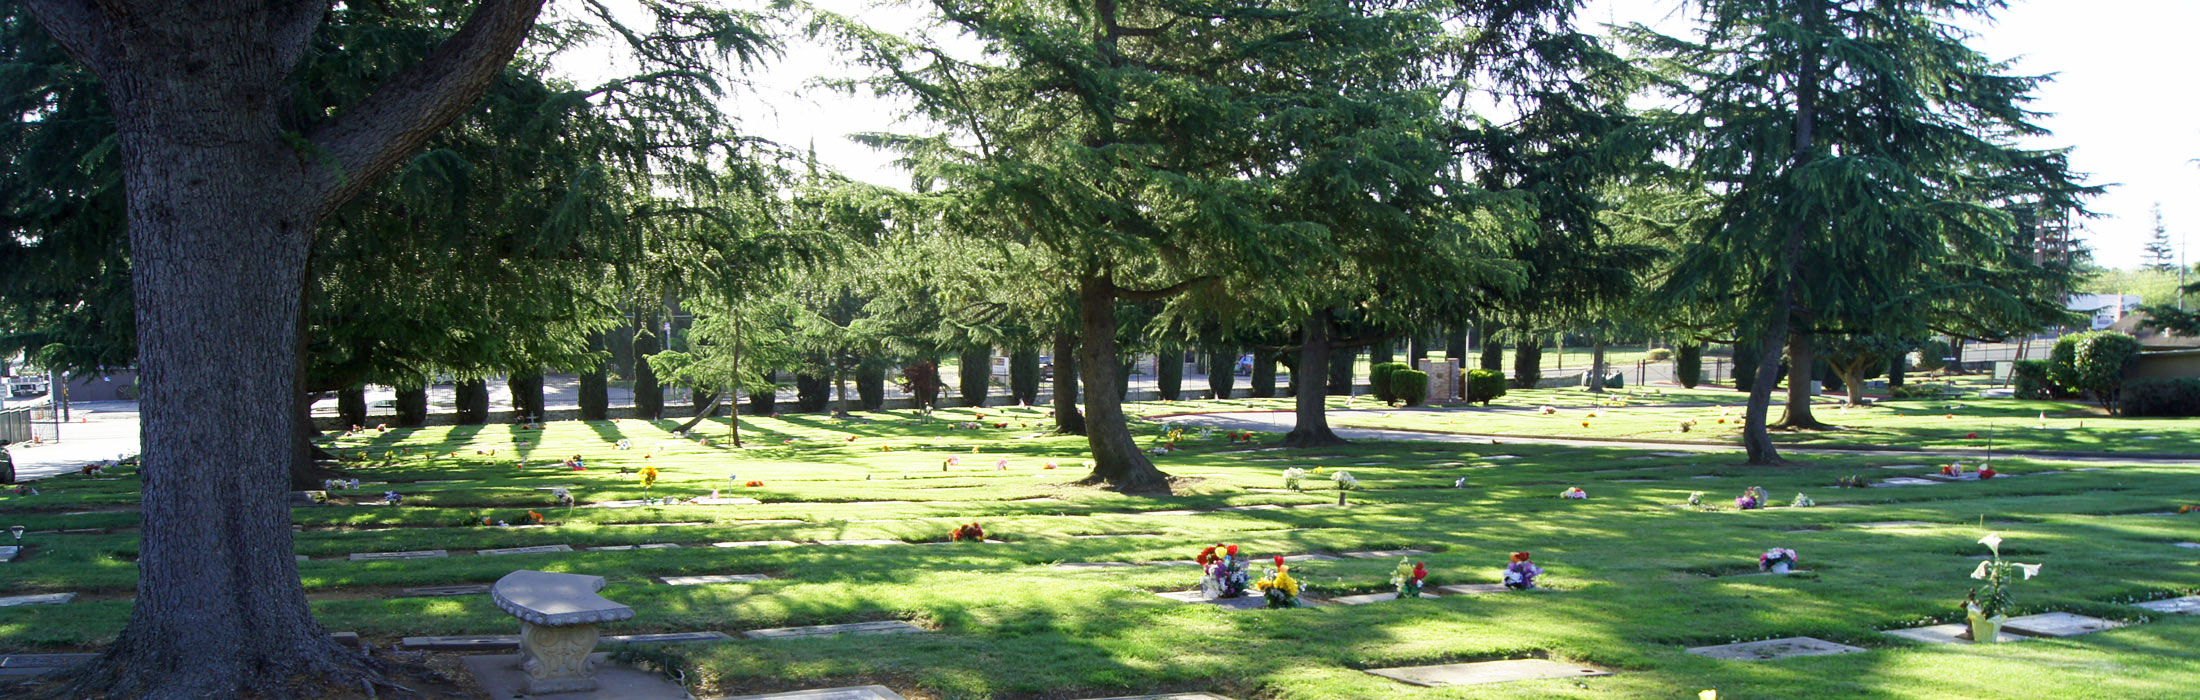 Ground Markers Image at Sylvan Cemetery.